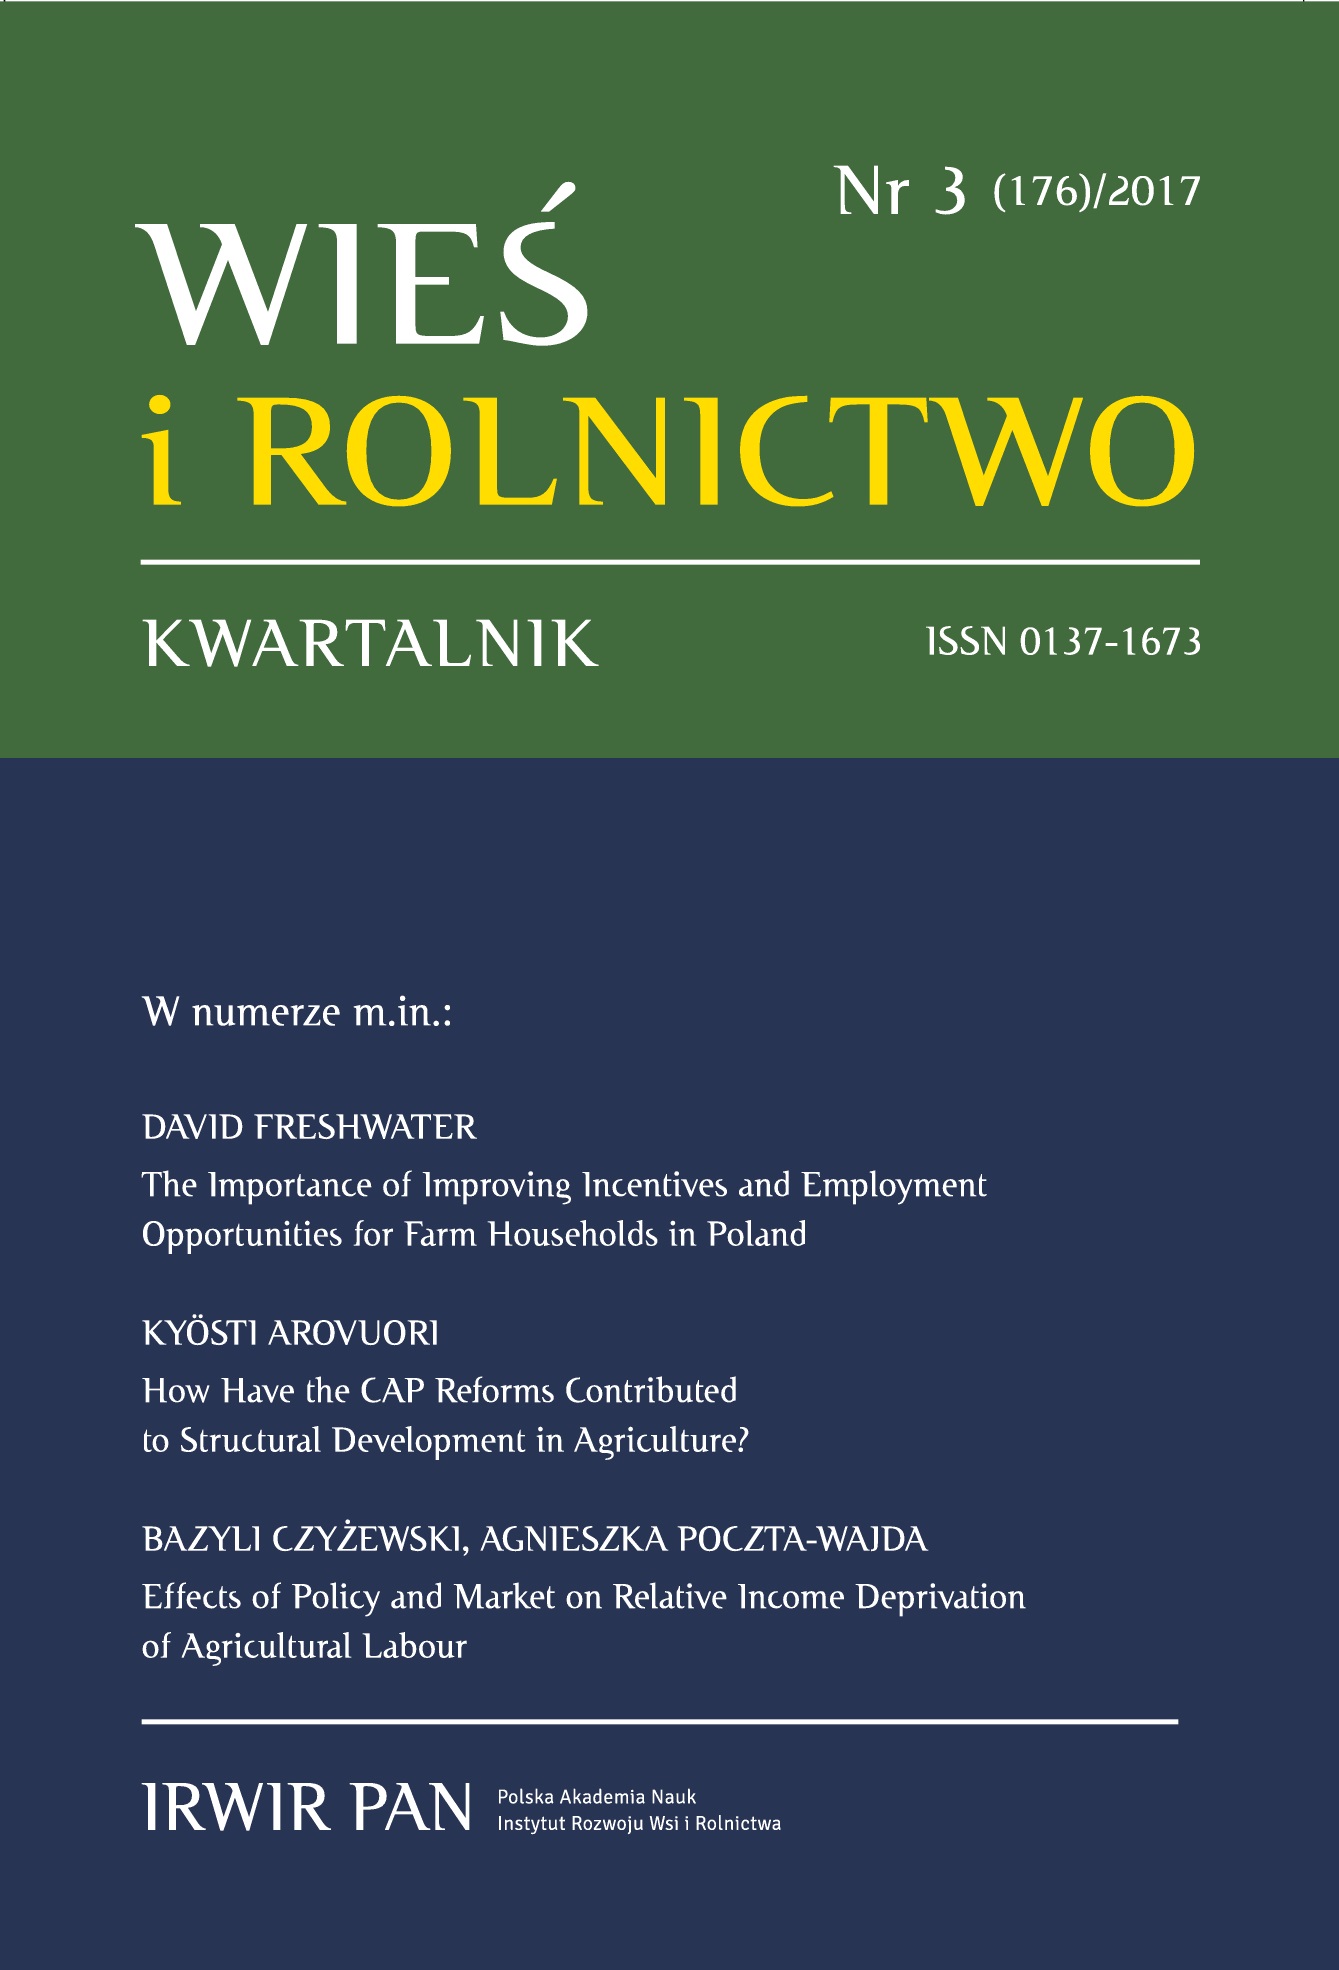 Studies on the Social Structure of Rural Poland, Vol. 1. Aspects of New and Former Social Differences, Institute of Rural and Agricultural Development, Polish Academy of Sciences, Scholar Publishing House, Warsaw 2016, ISBN 978-83-7383-860-4, p. 179 Cover Image